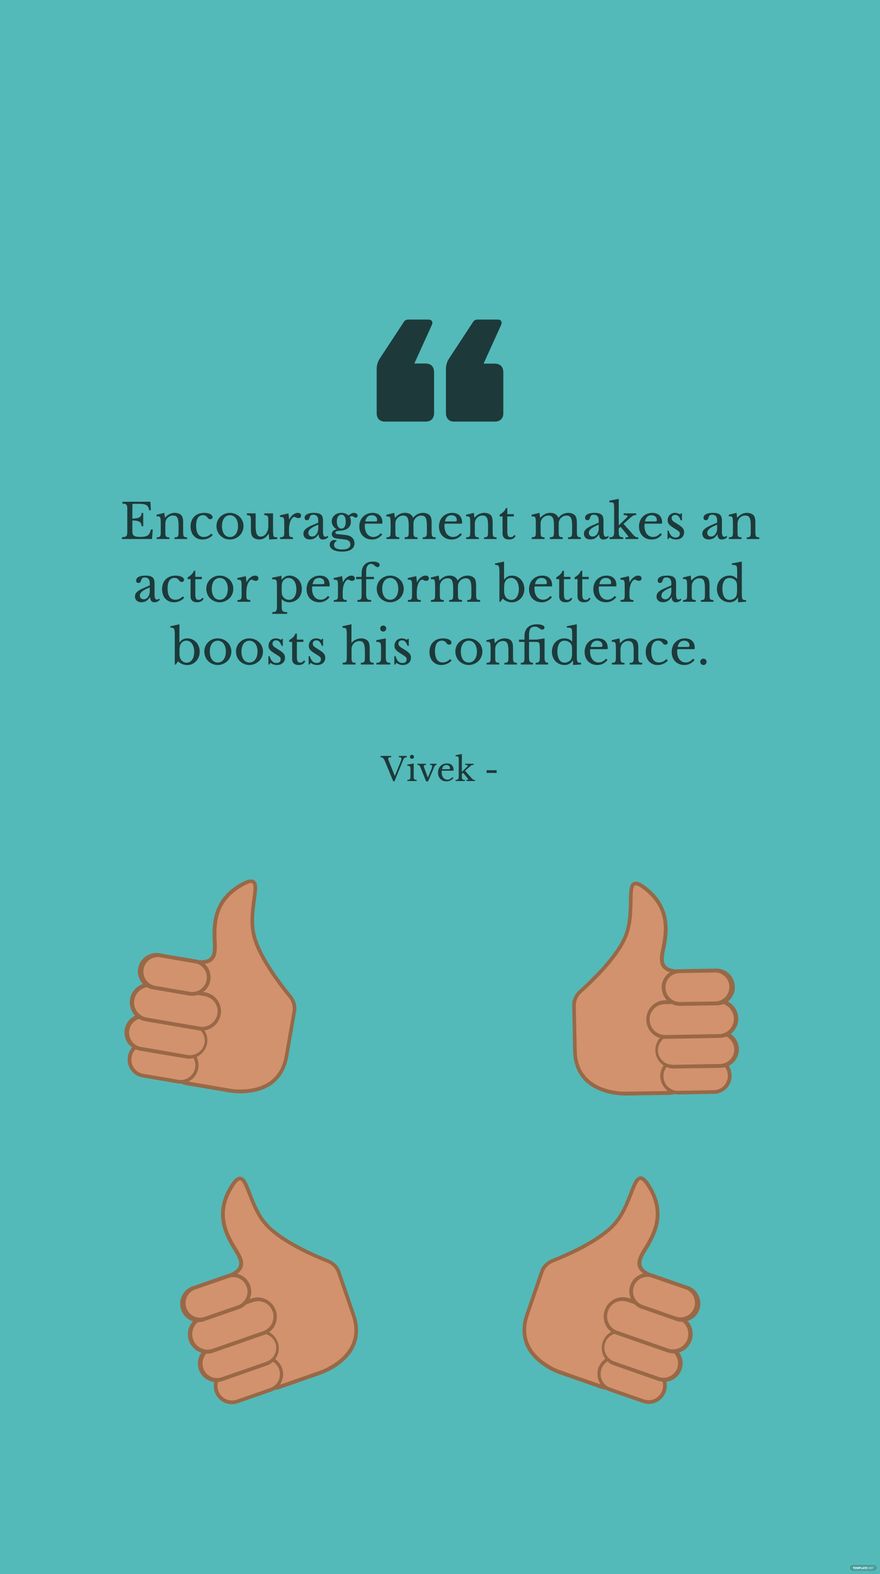 Free Vivek - Encouragement makes an actor perform better and boosts his confidence. Template